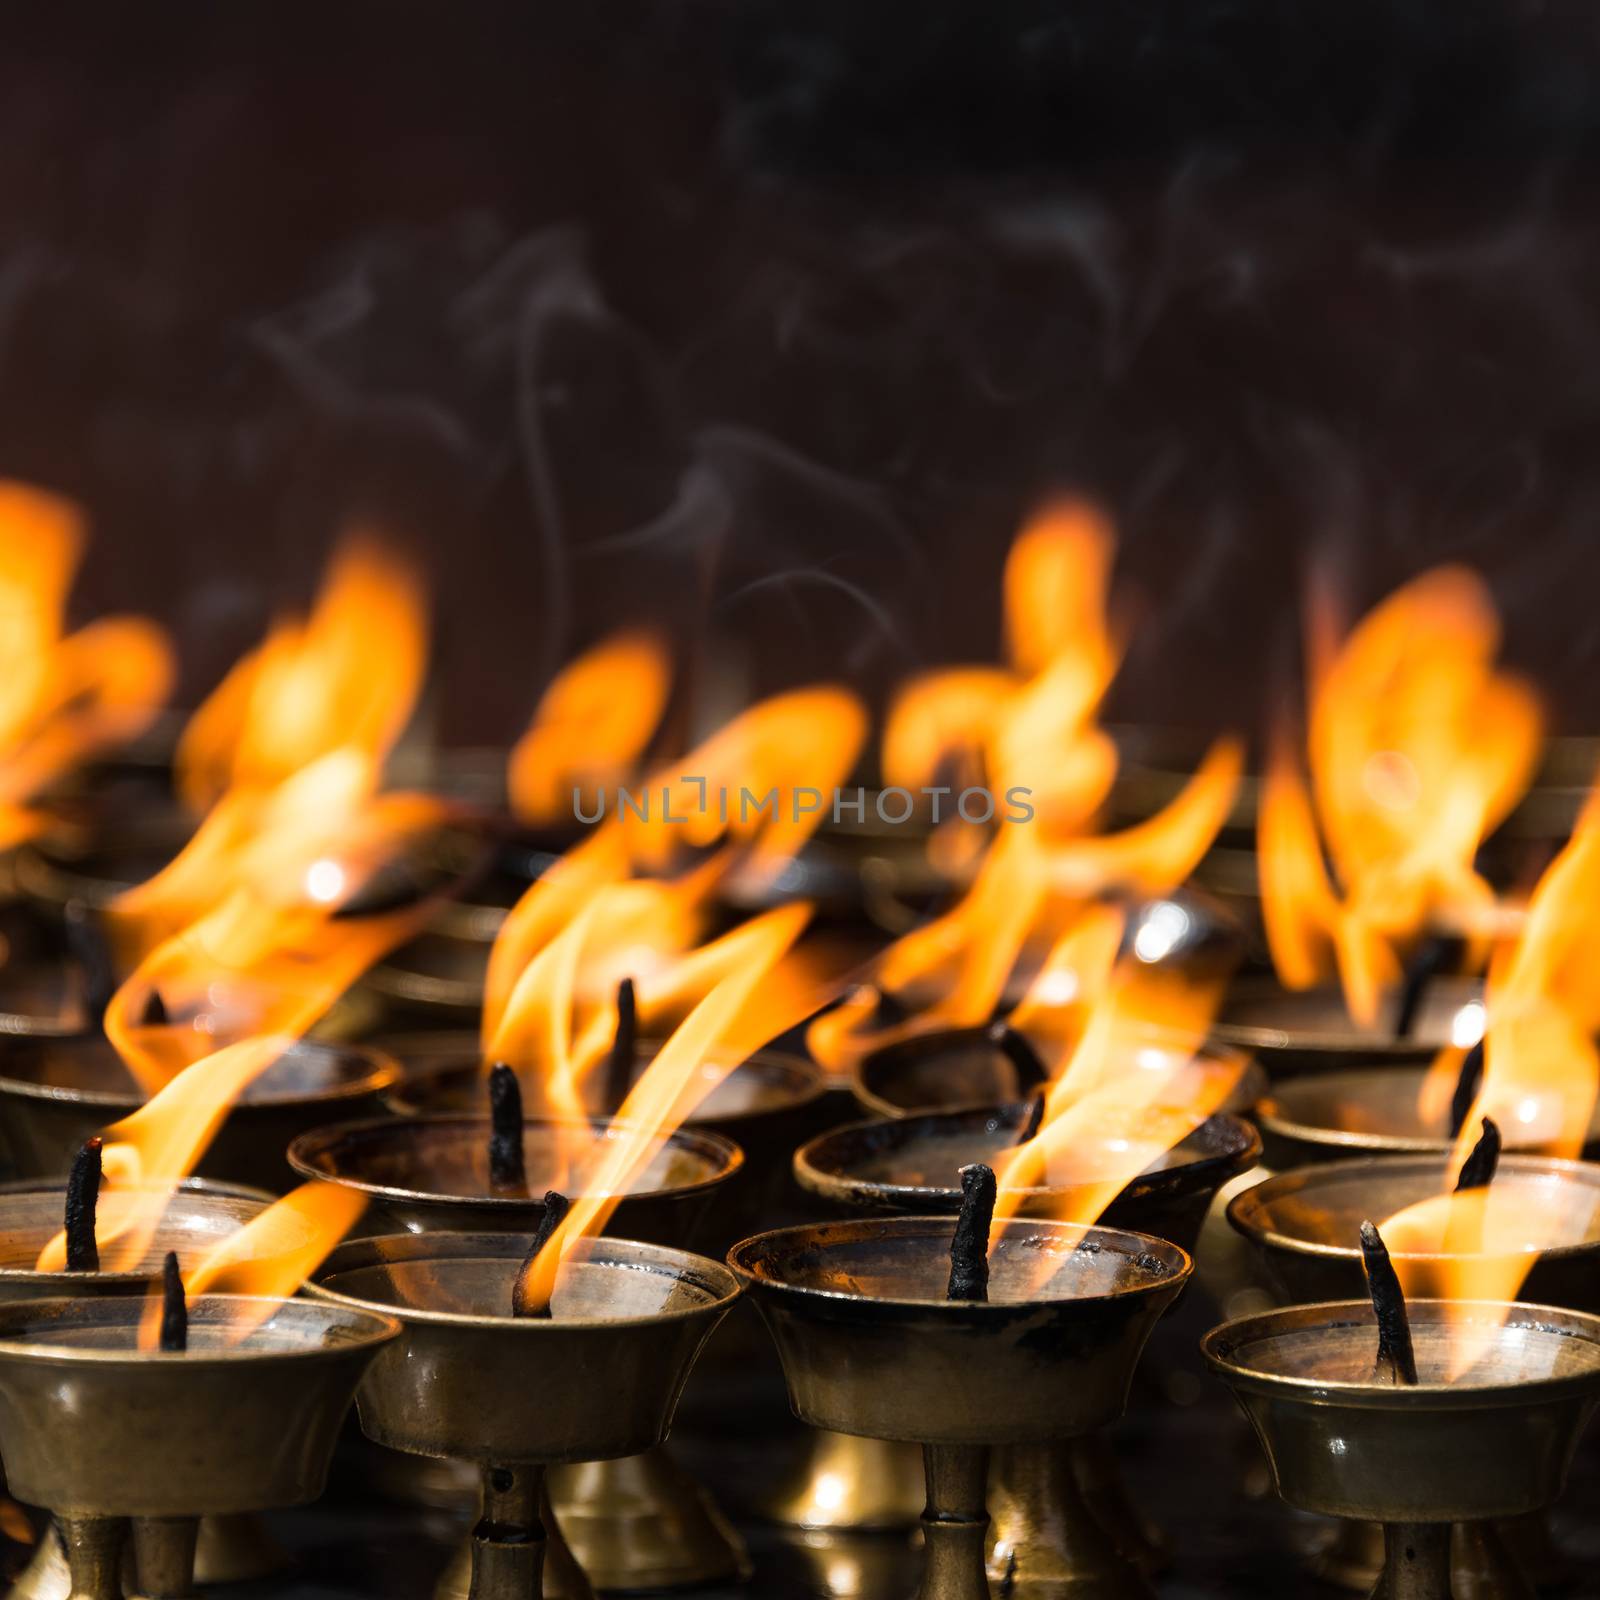 Butter lamps in a buddhist monastery by dutourdumonde